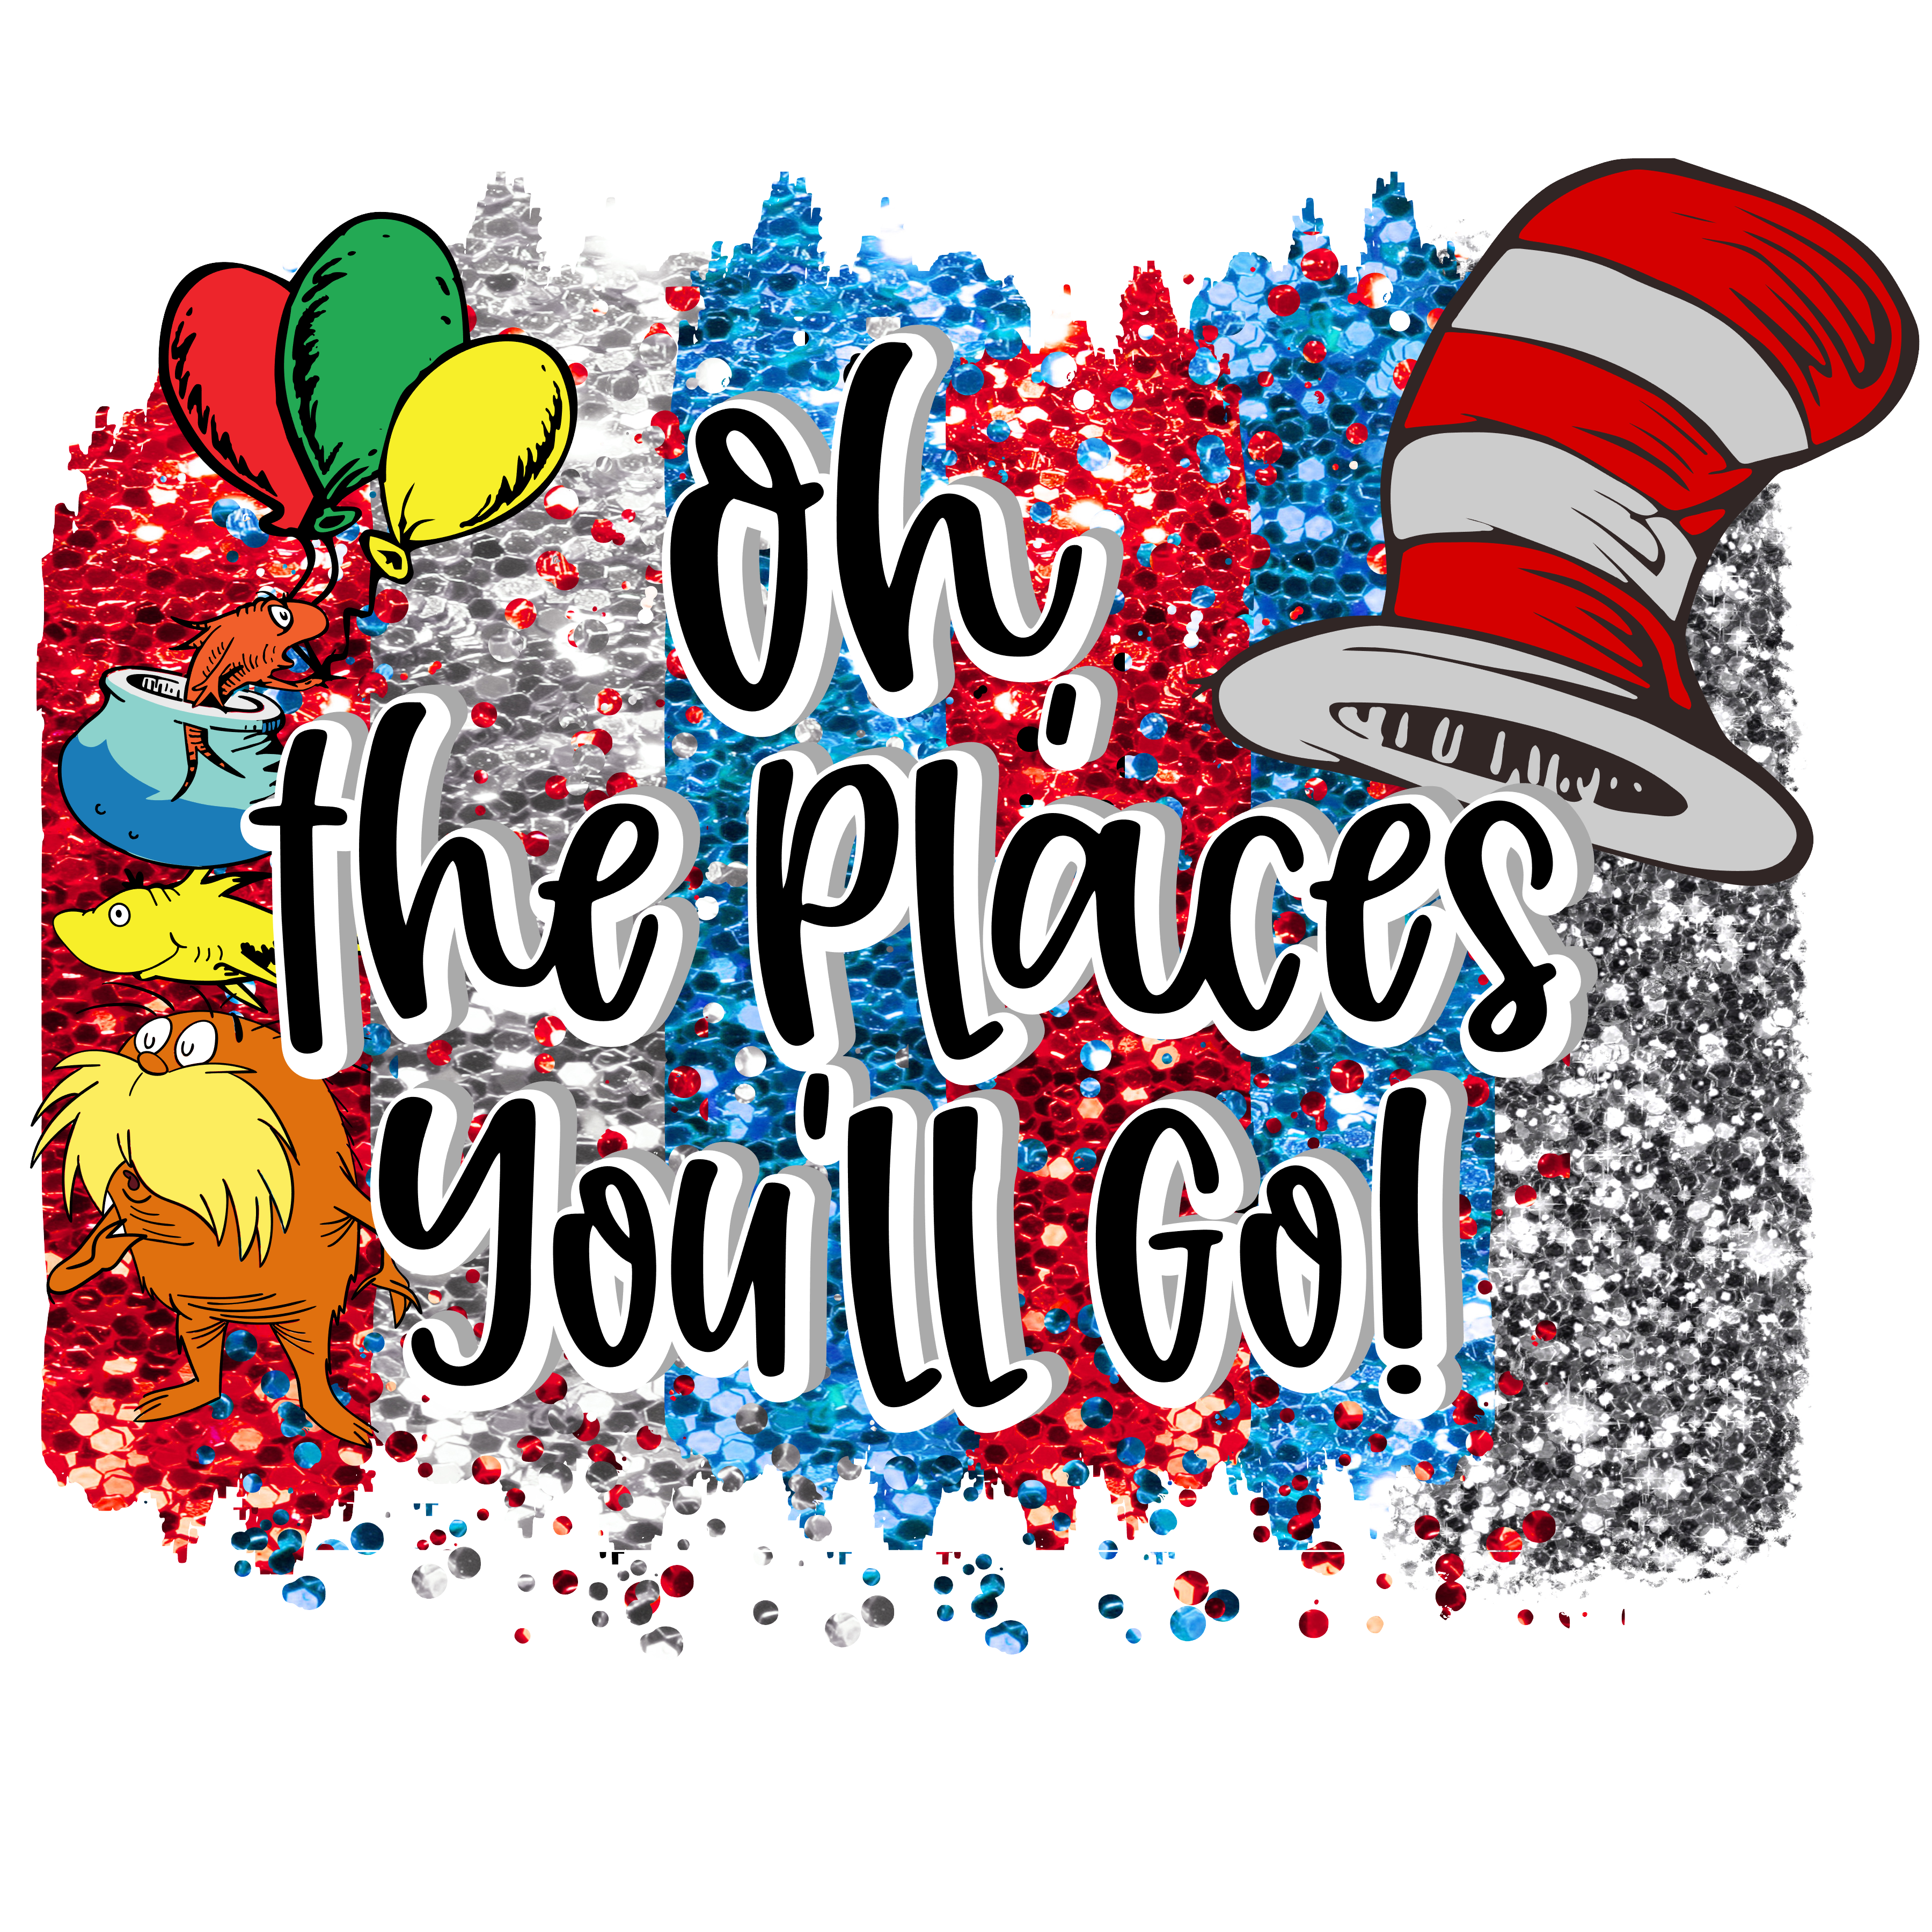 14. Oh the places you'll go with background - Graphic Tee